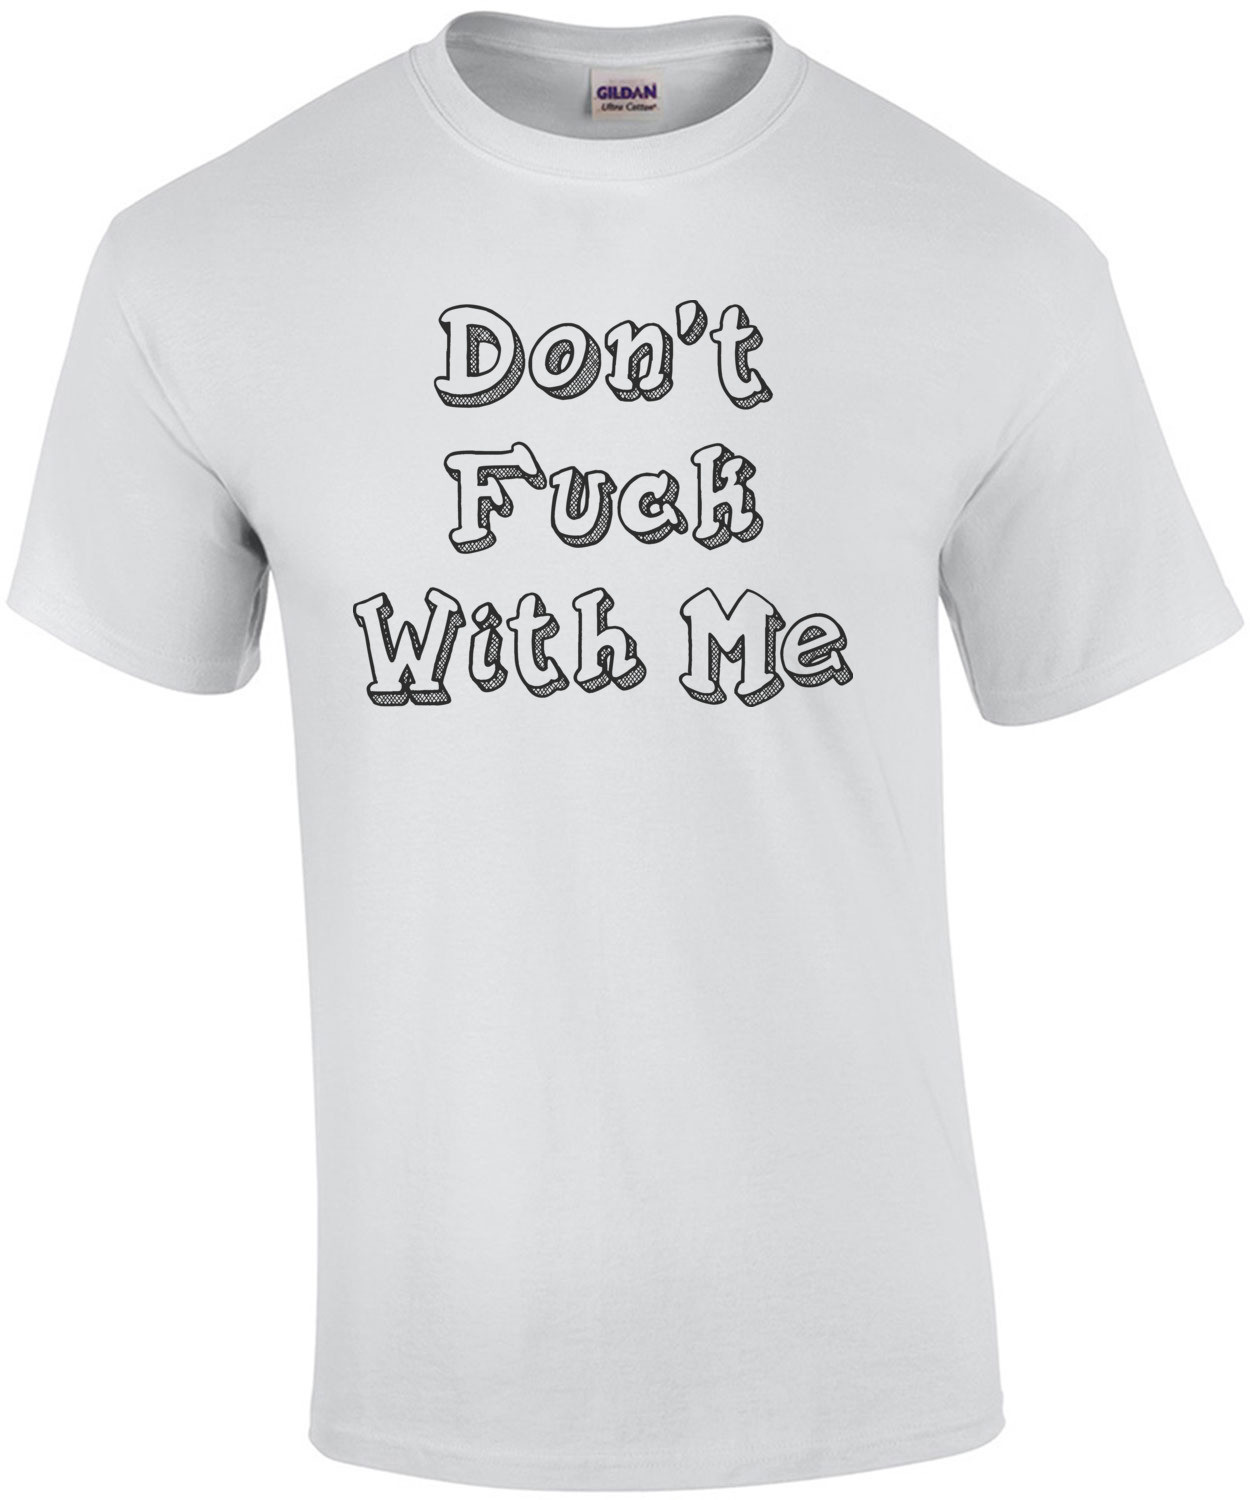 Don't Fuck With Me Shirt